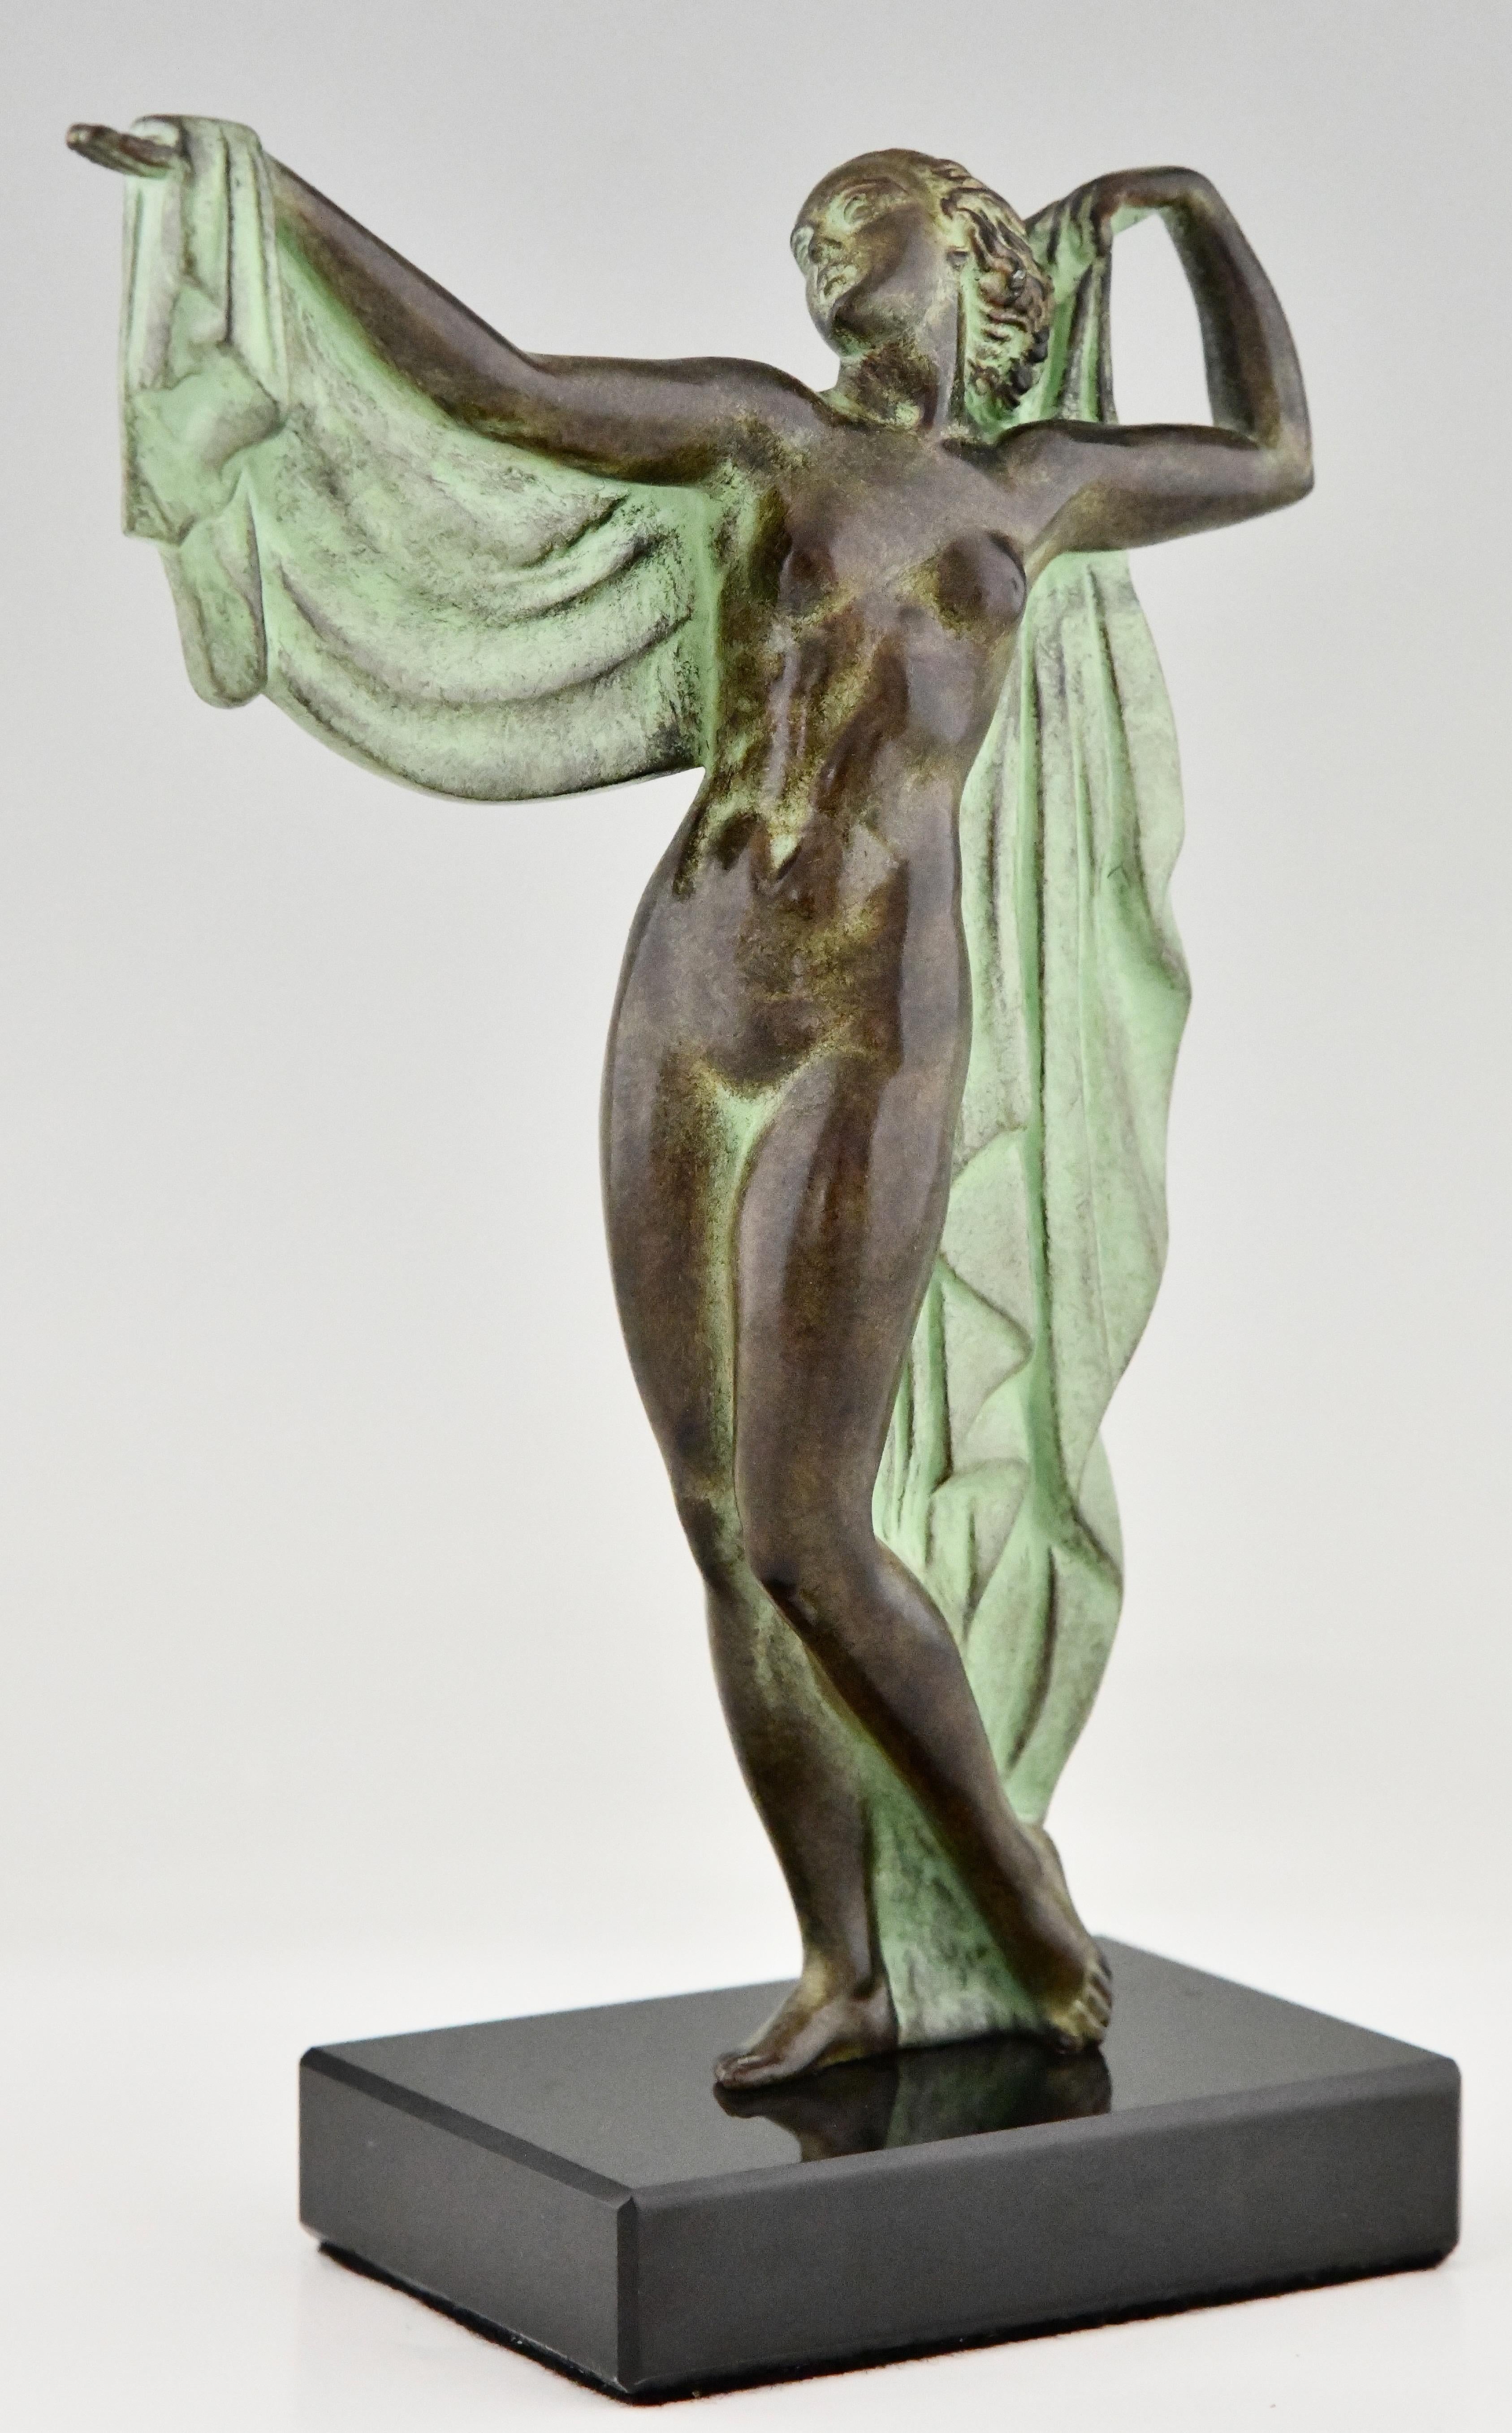 Art Deco style sculpture nude bather VENUS by Fayral, pseudonym of Pierre Le Faguays with Le Verrier foundry seal. 
Patinated Art Metal on a Black marble base. 
Design 1930.
Posthumous contemporary cast of the Le Verrier foundry. 
With certificate